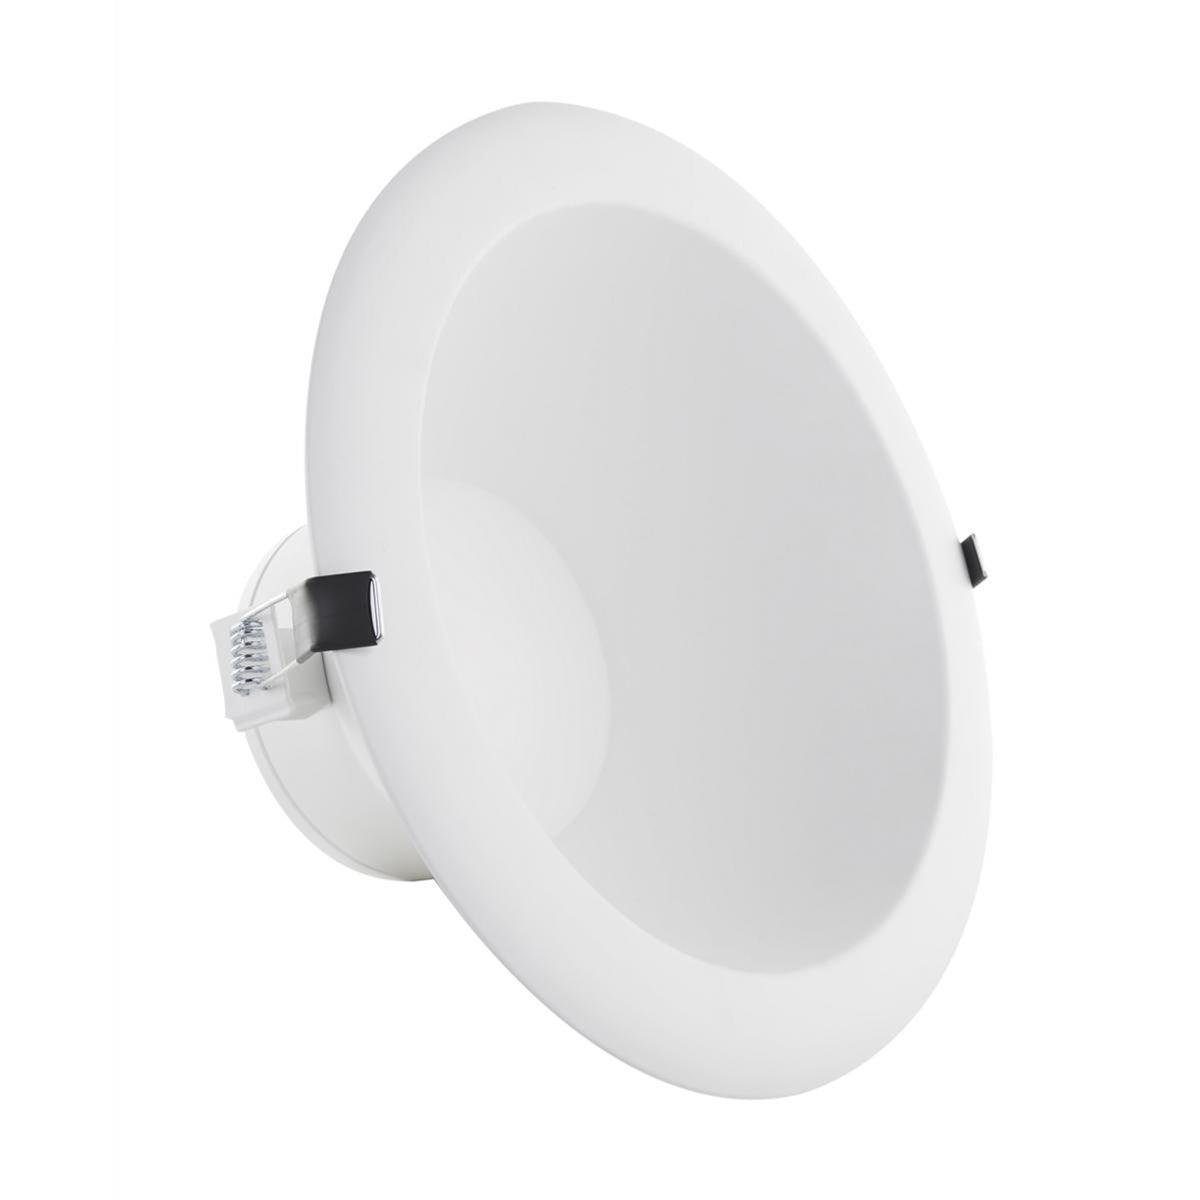 8 In. Commercial Canless LED Recessed Light, 32 Watt, 2450 Lumens, Selectable CCT, 2700K to 5000K, White Finish